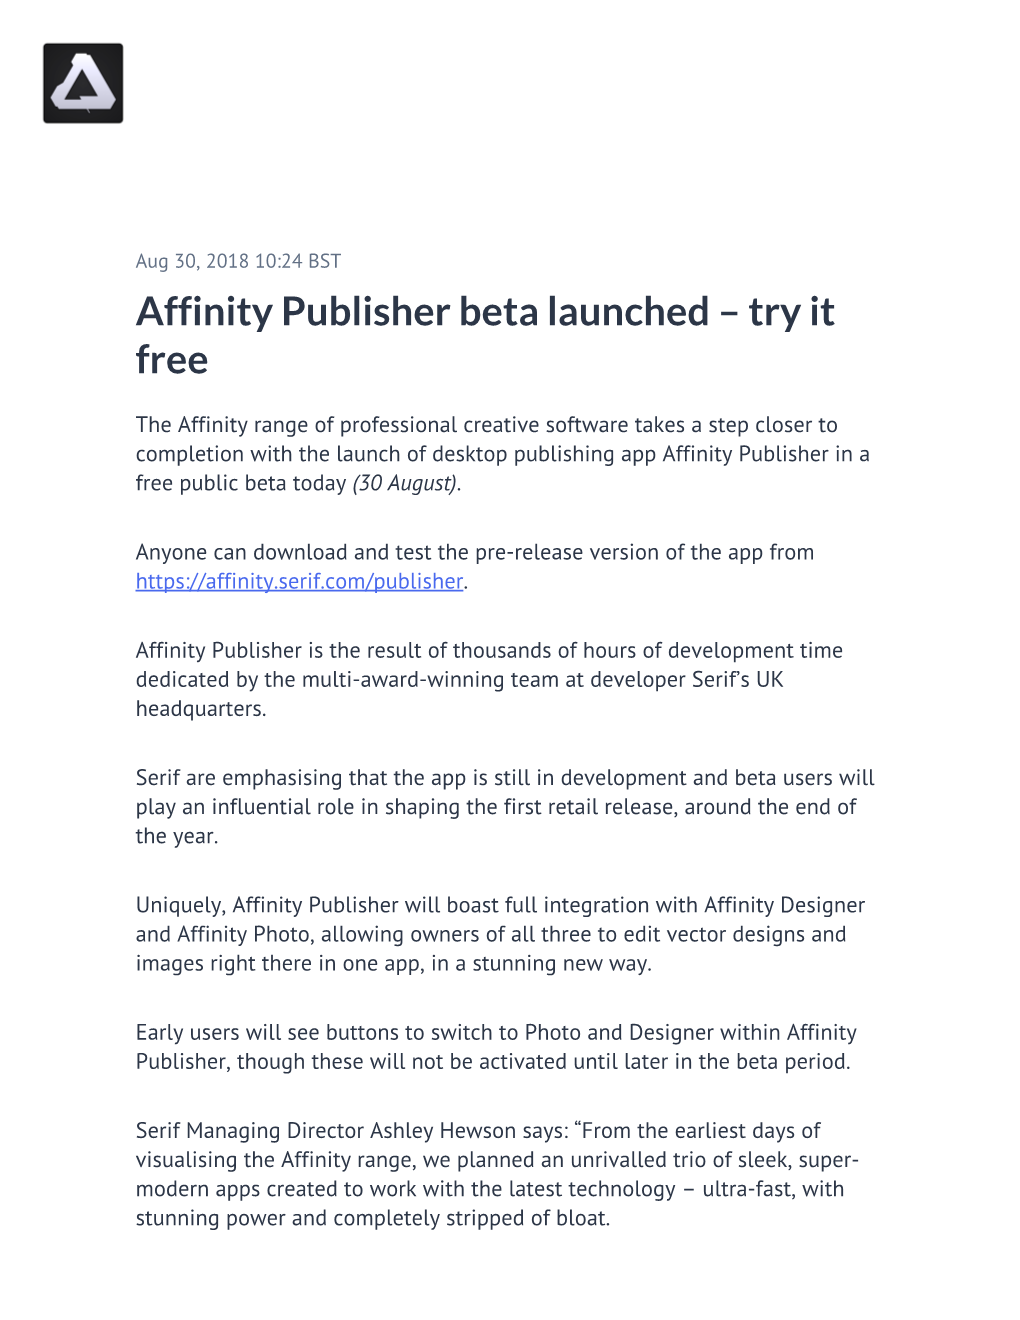 Affinity Publisher Beta Launched – Try It Free